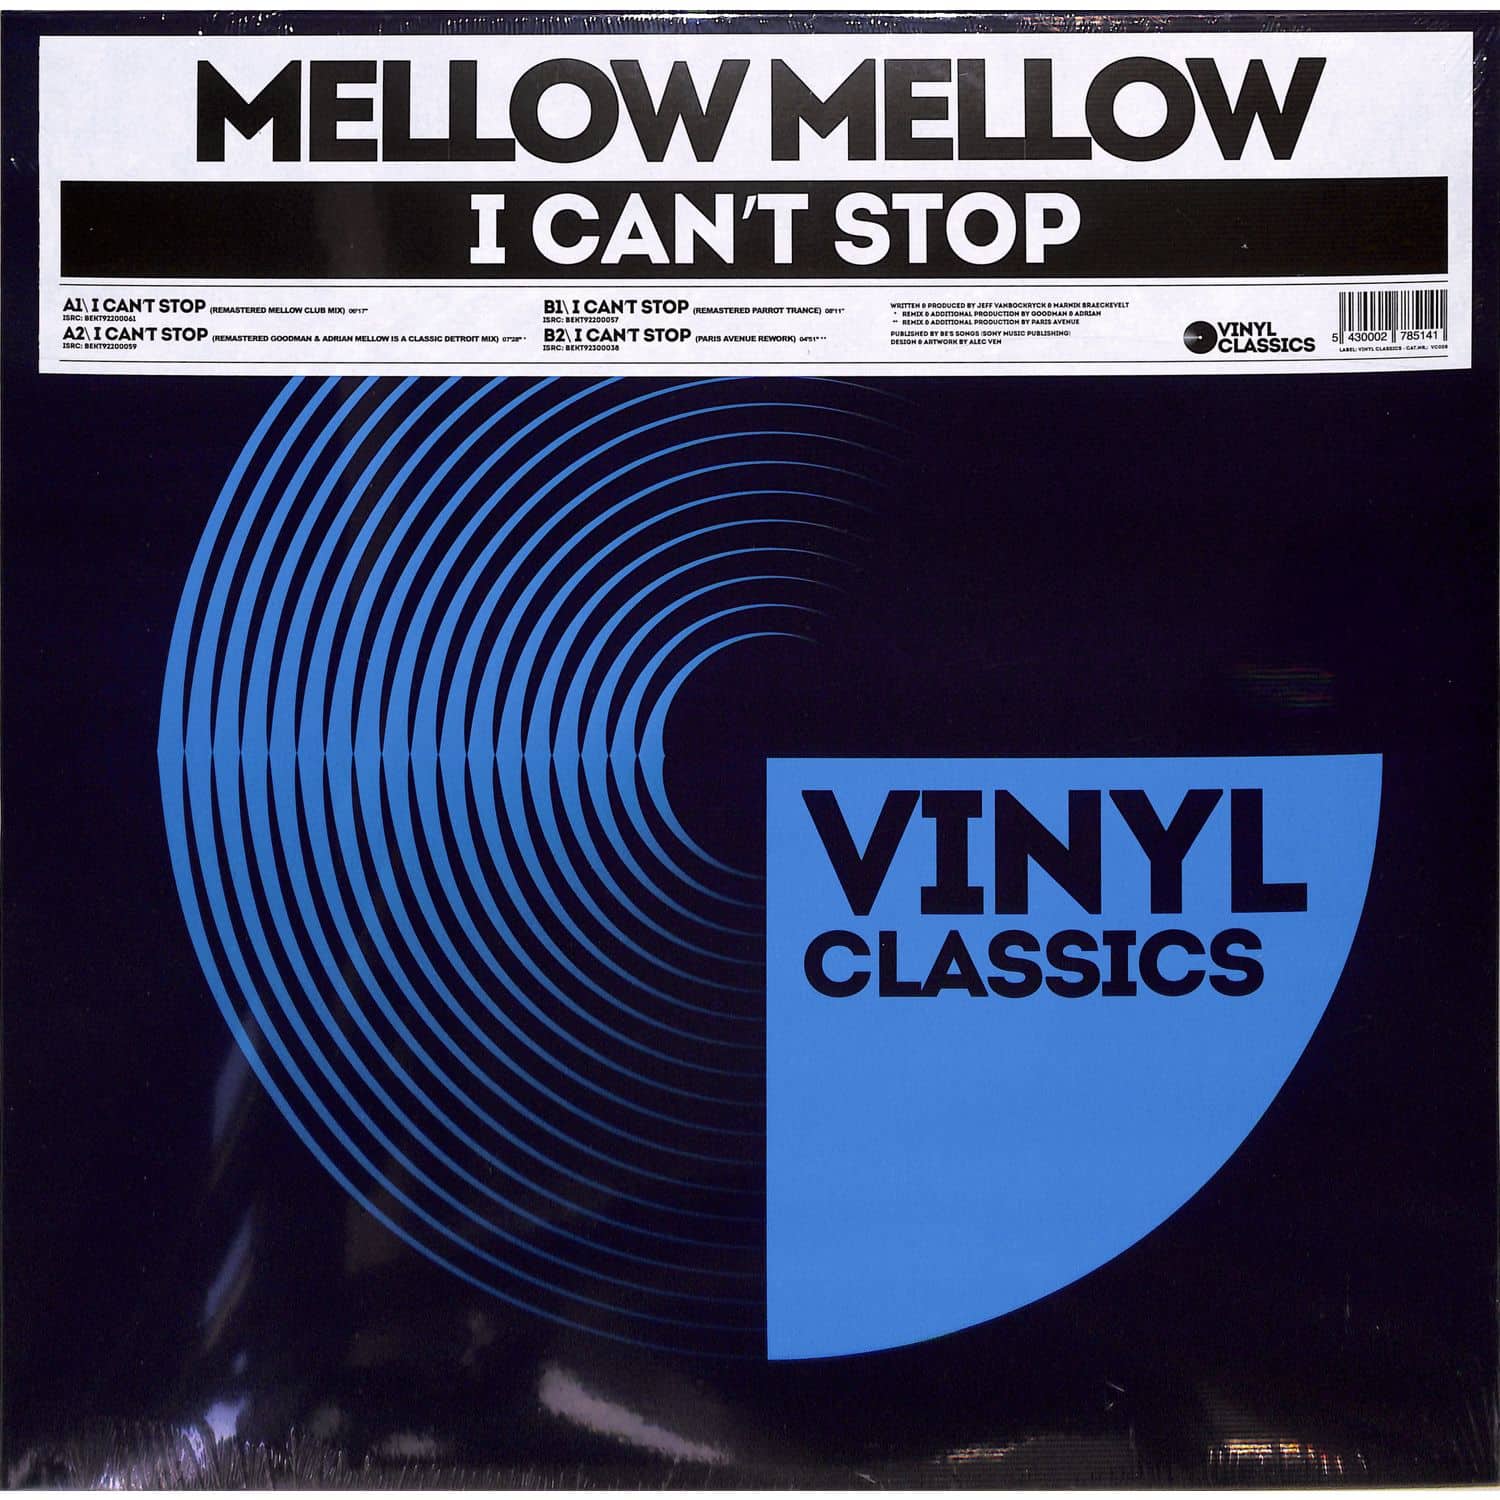 Mellow Mellow - I CANT STOP